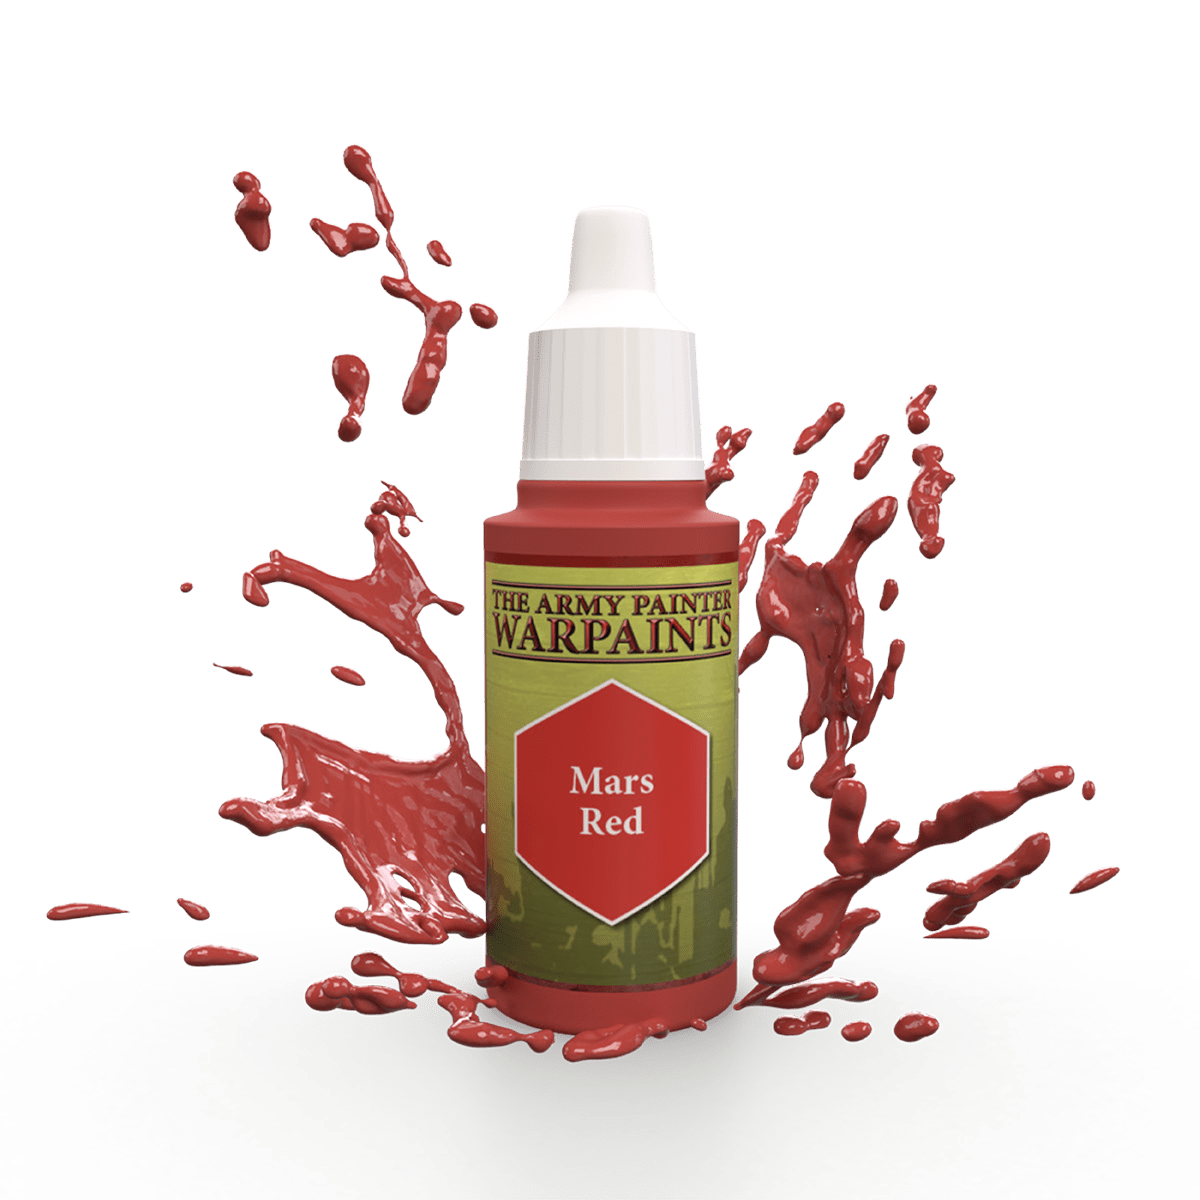 The Army Painter: Warpaints - Mars Red - Gamescape